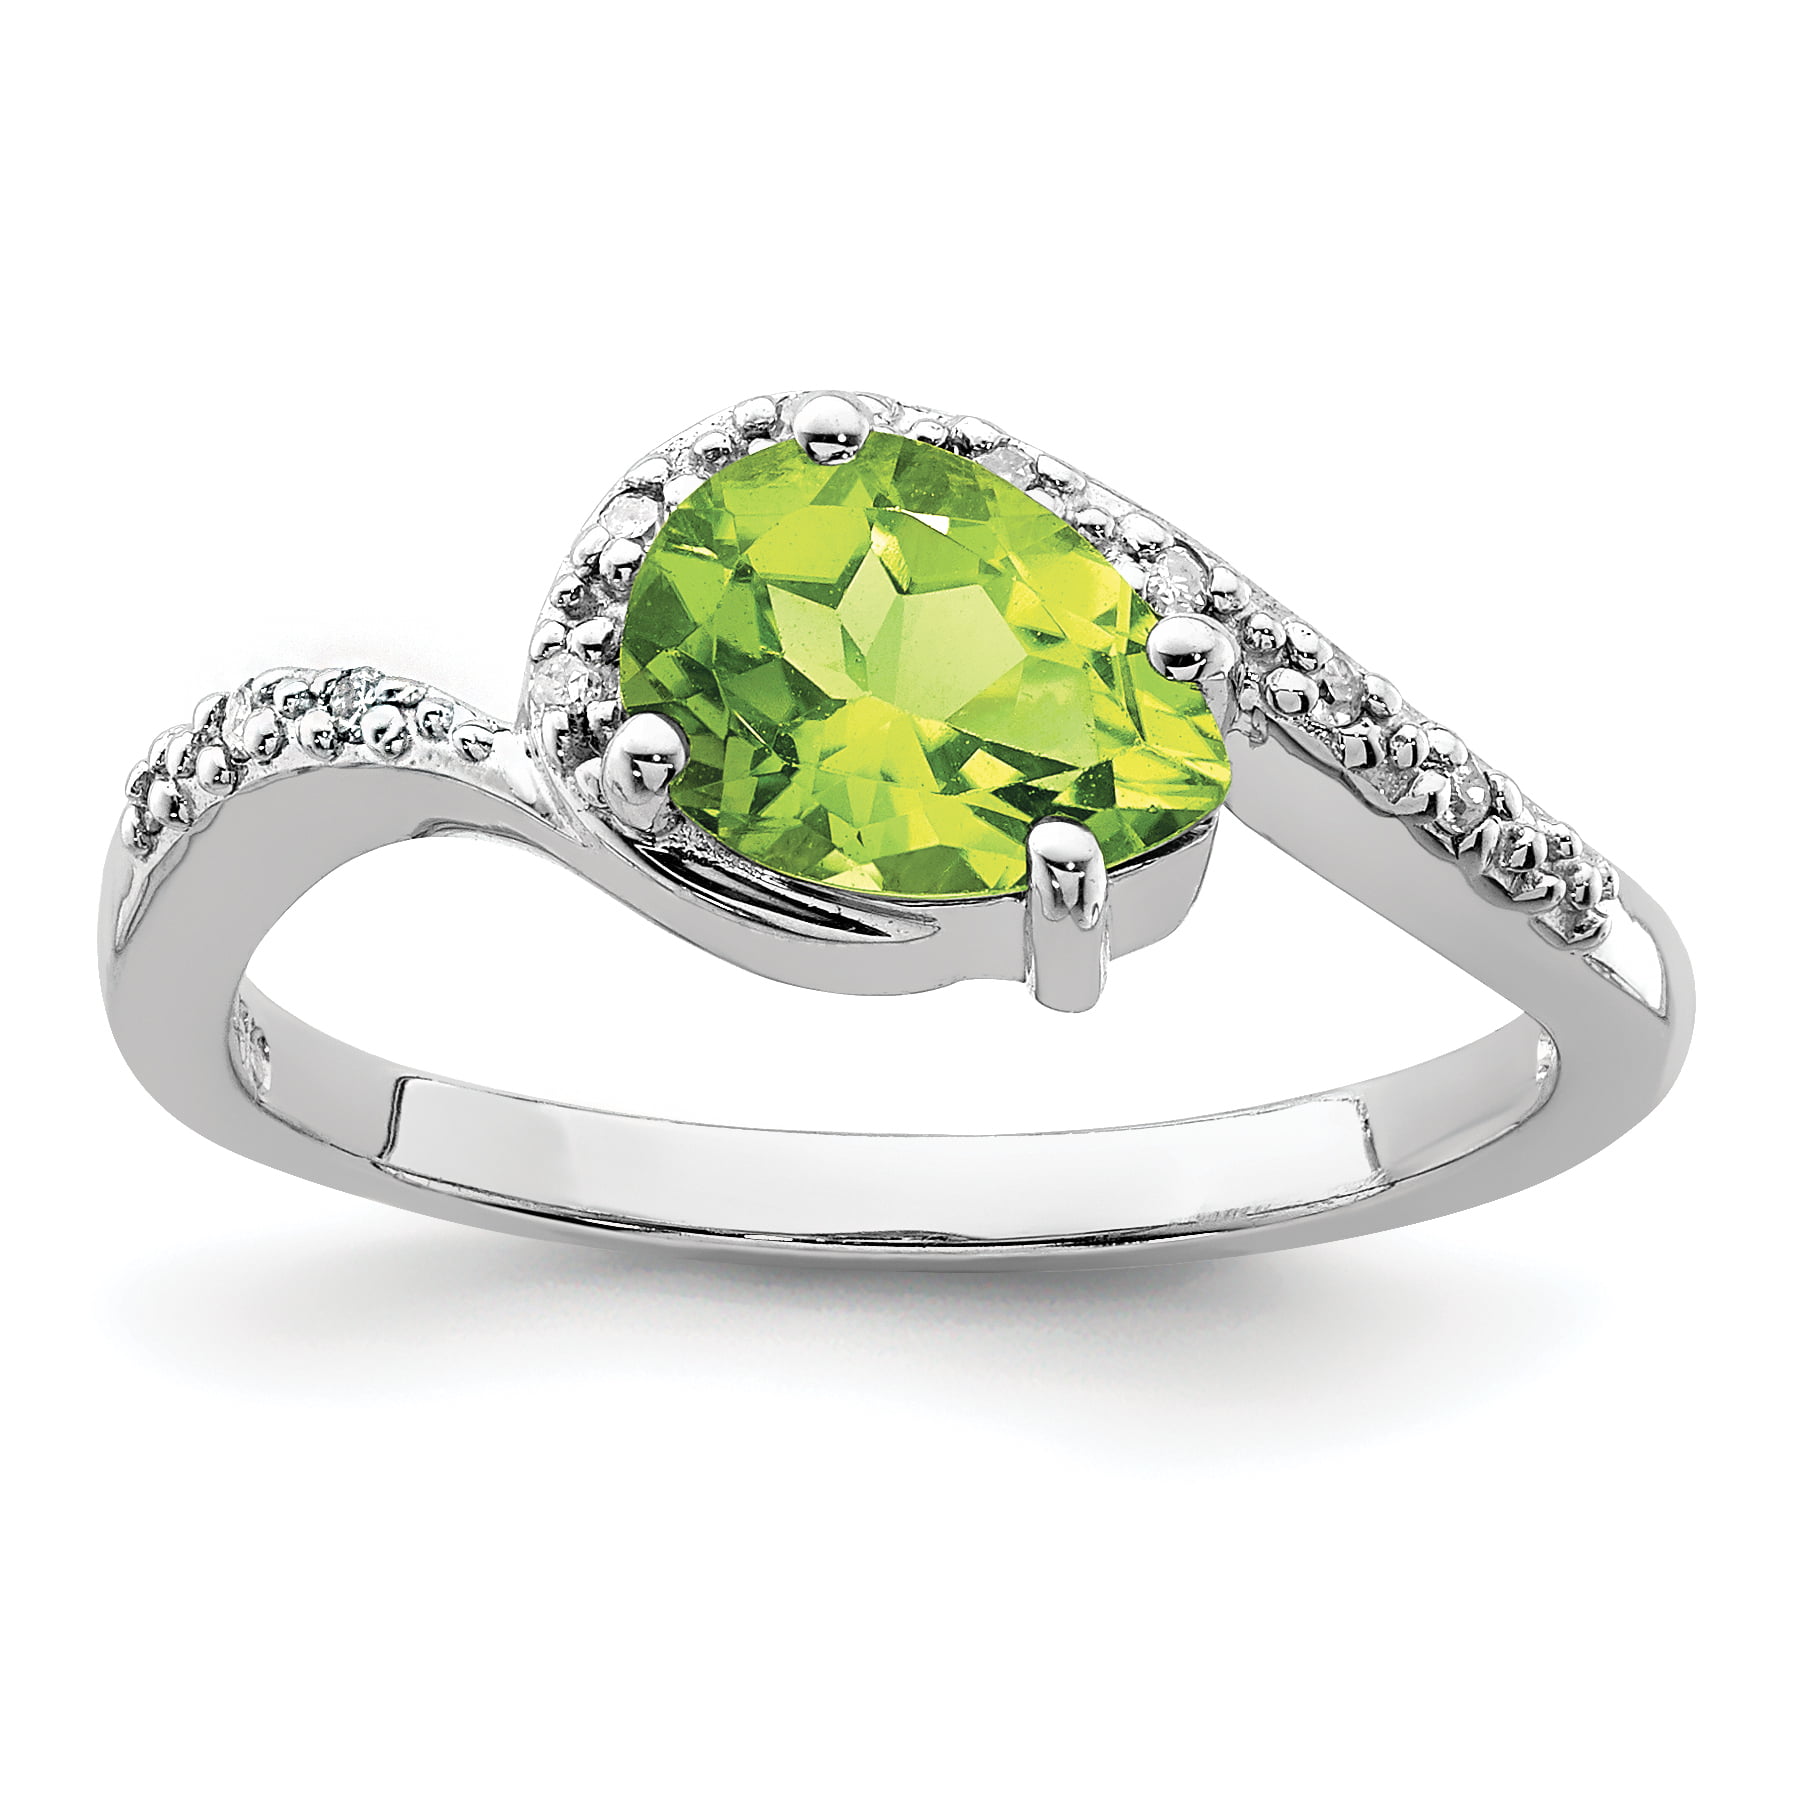 925 Sterling Silver Polished Open back Peridot Diamond Ring Jewelry Gifts for Women 7 9 Ring Size Options 